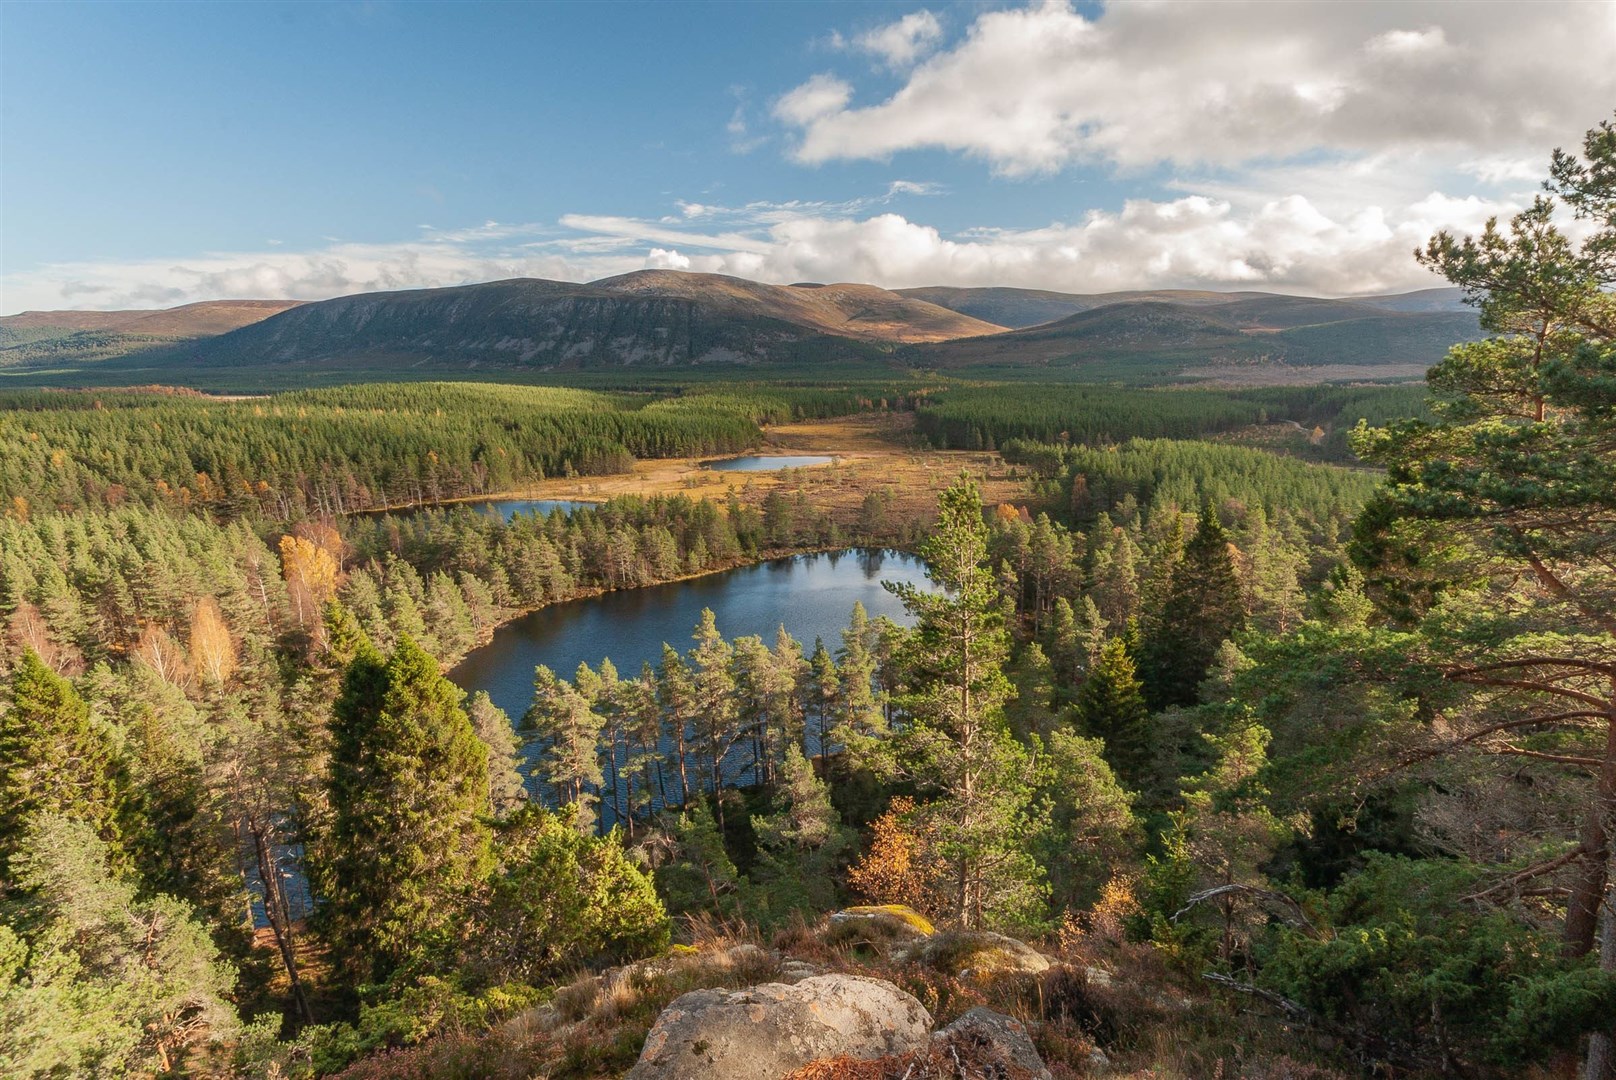 Scotland’s woodlands and green spaces are regarded as important places for people to take exercise, relax and enjoy.